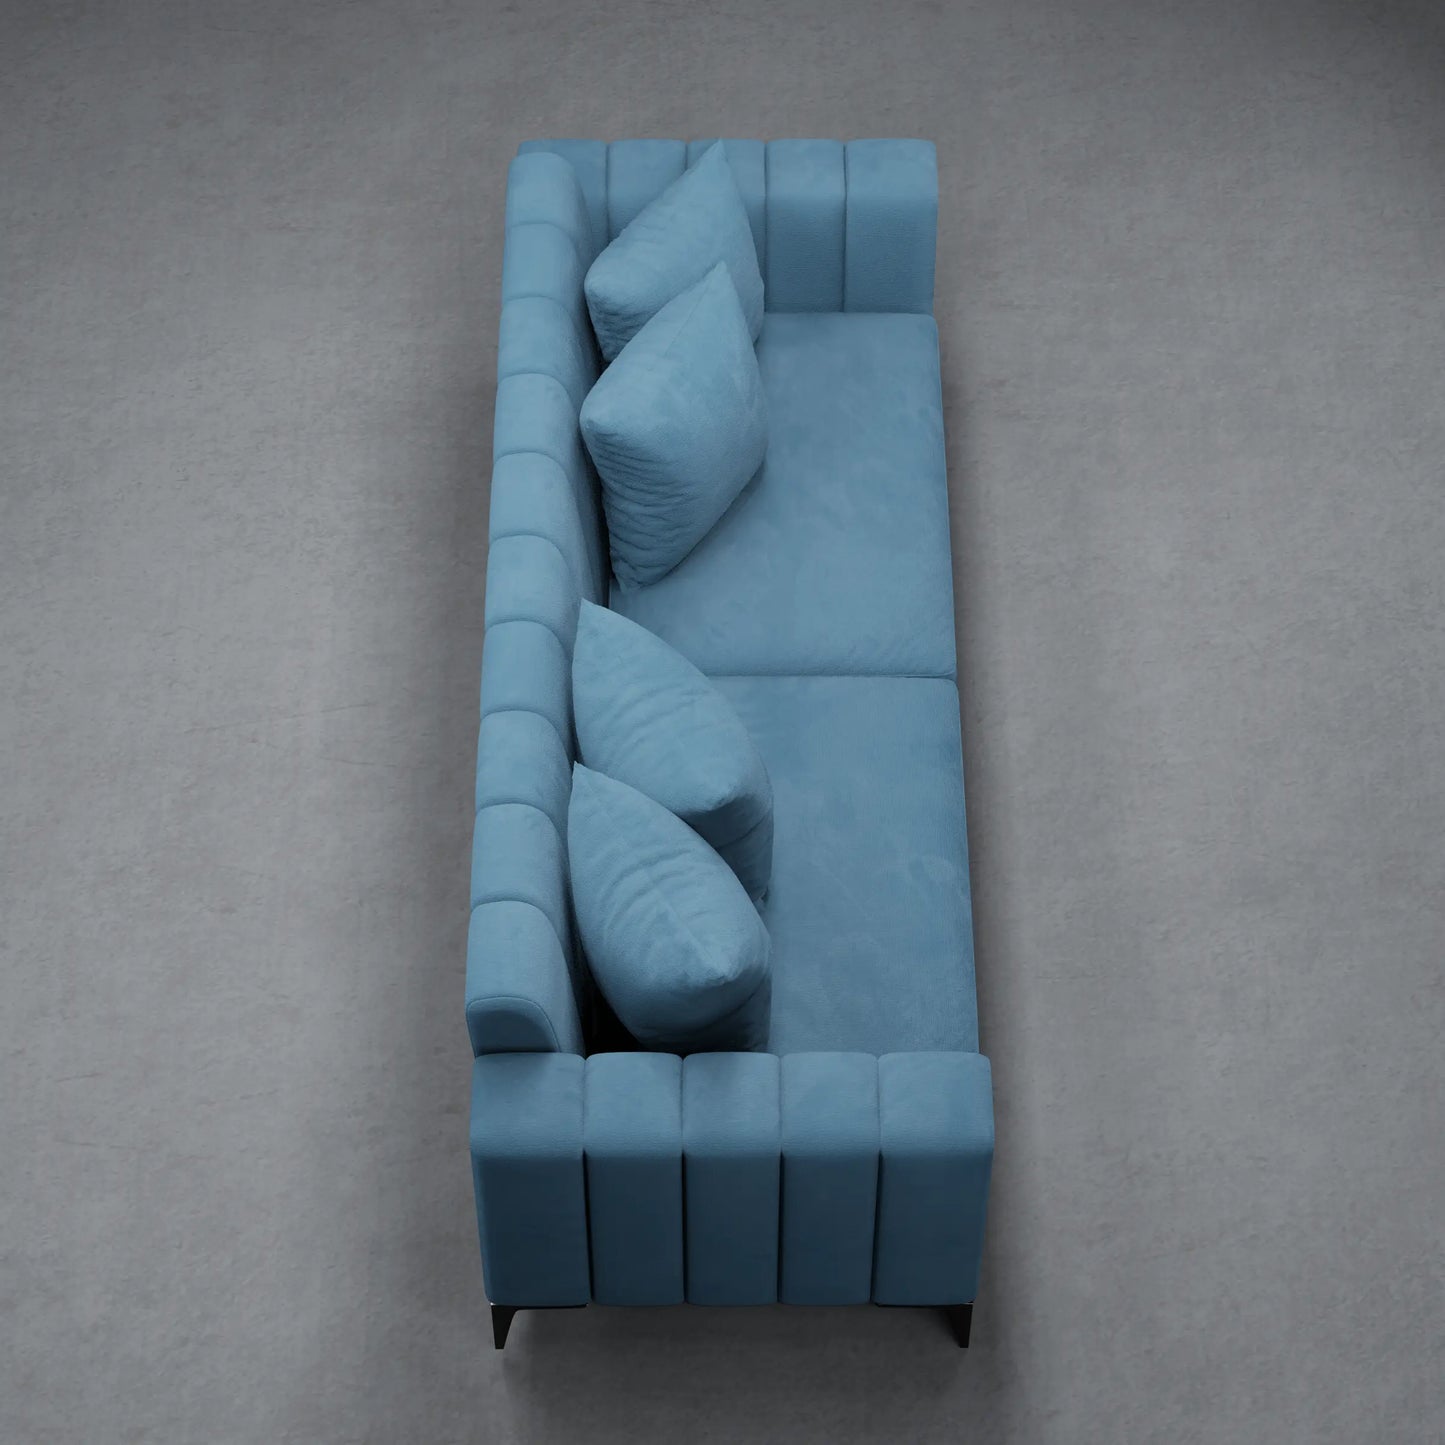 Grape - Contemporary 4 Seater Couch in Linen Finish | Space Blue Color